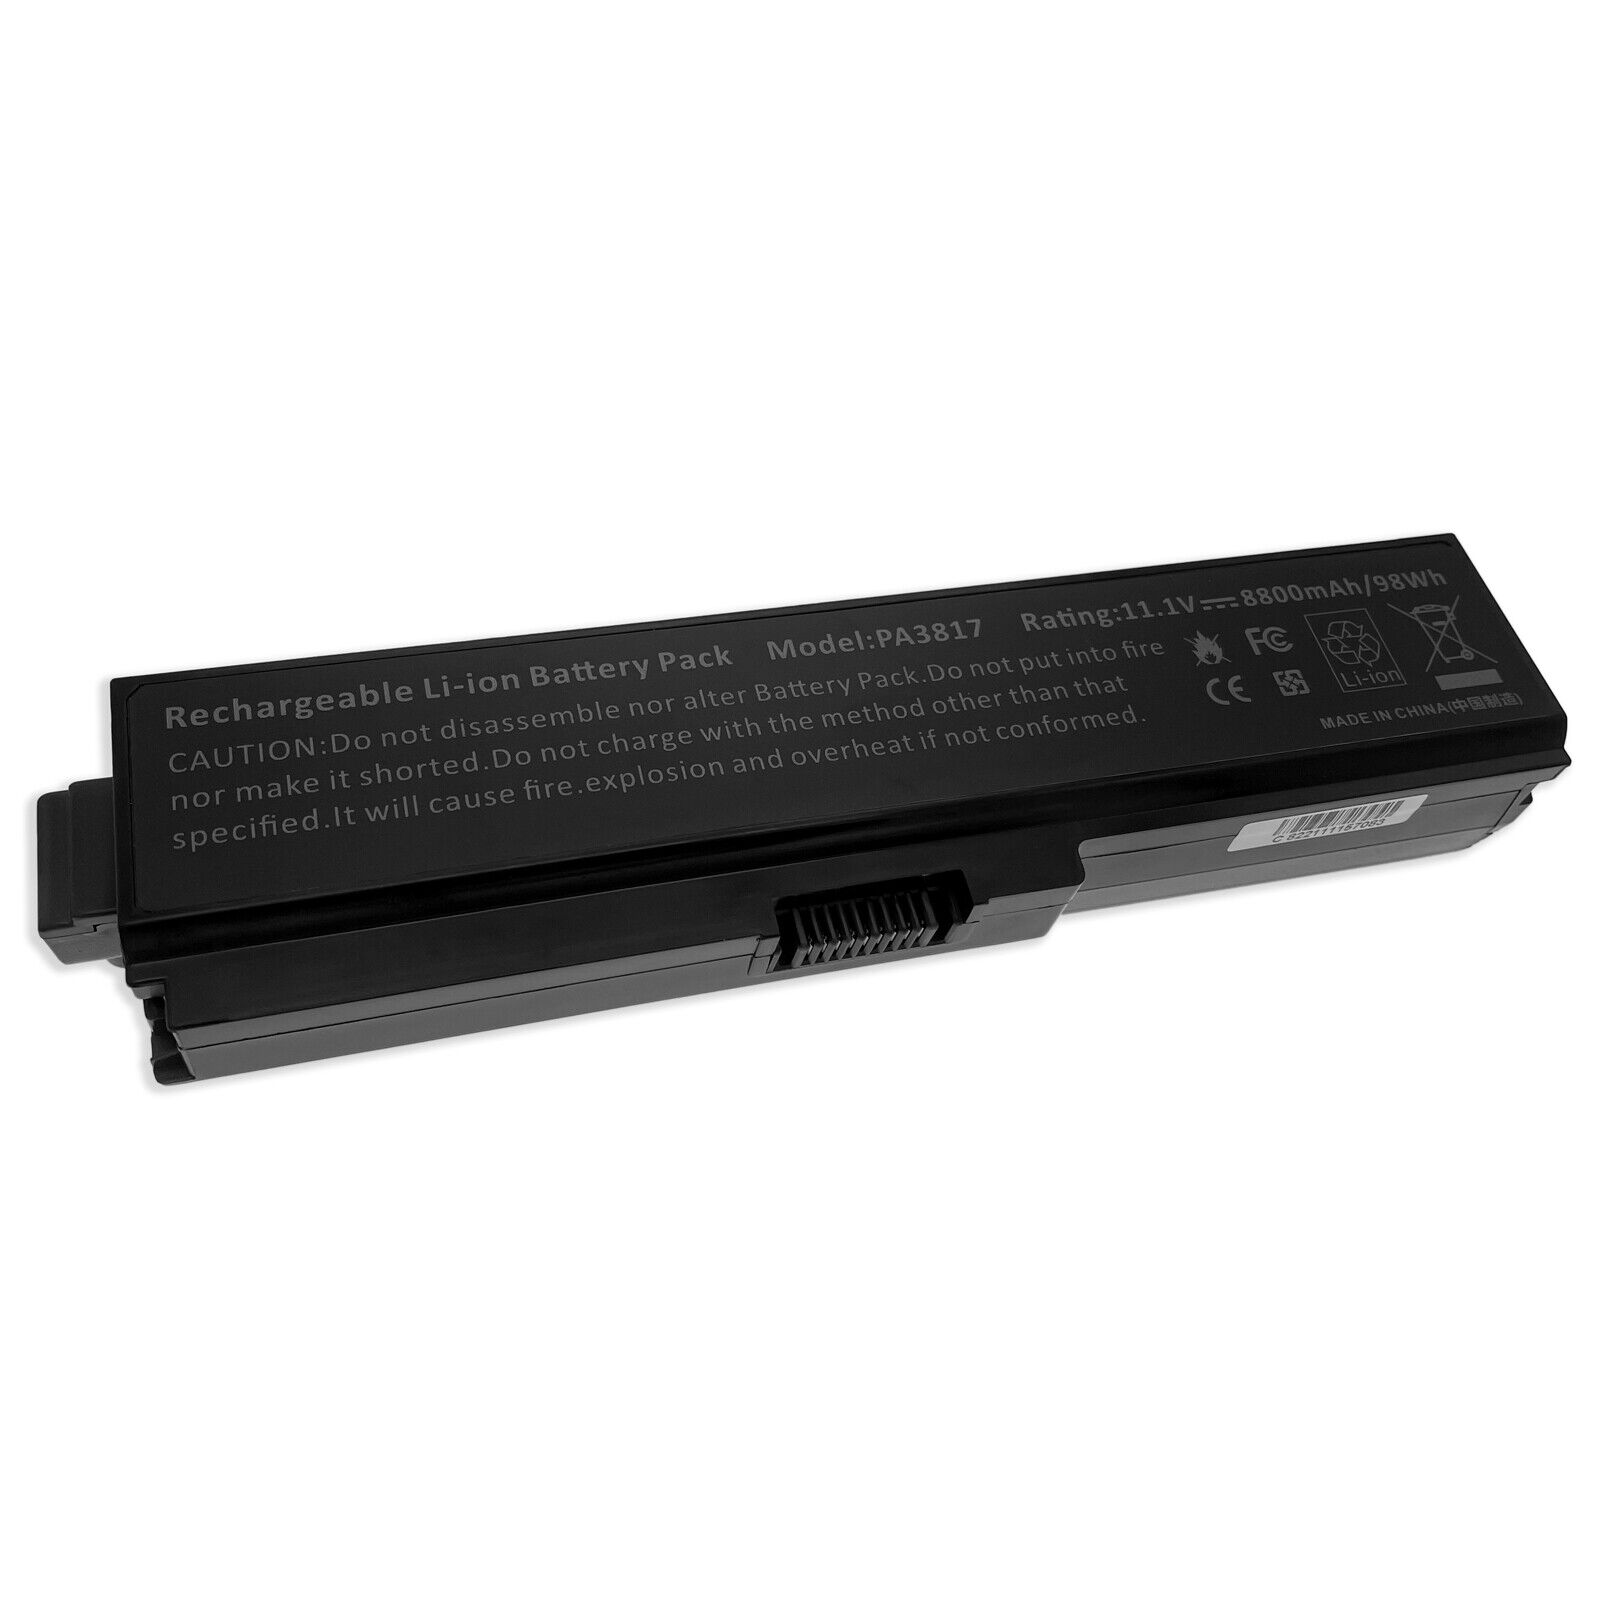 12 Cell Laptop Battery for Toshiba Satellite A665-S6085 A665-S6086 USA shipping